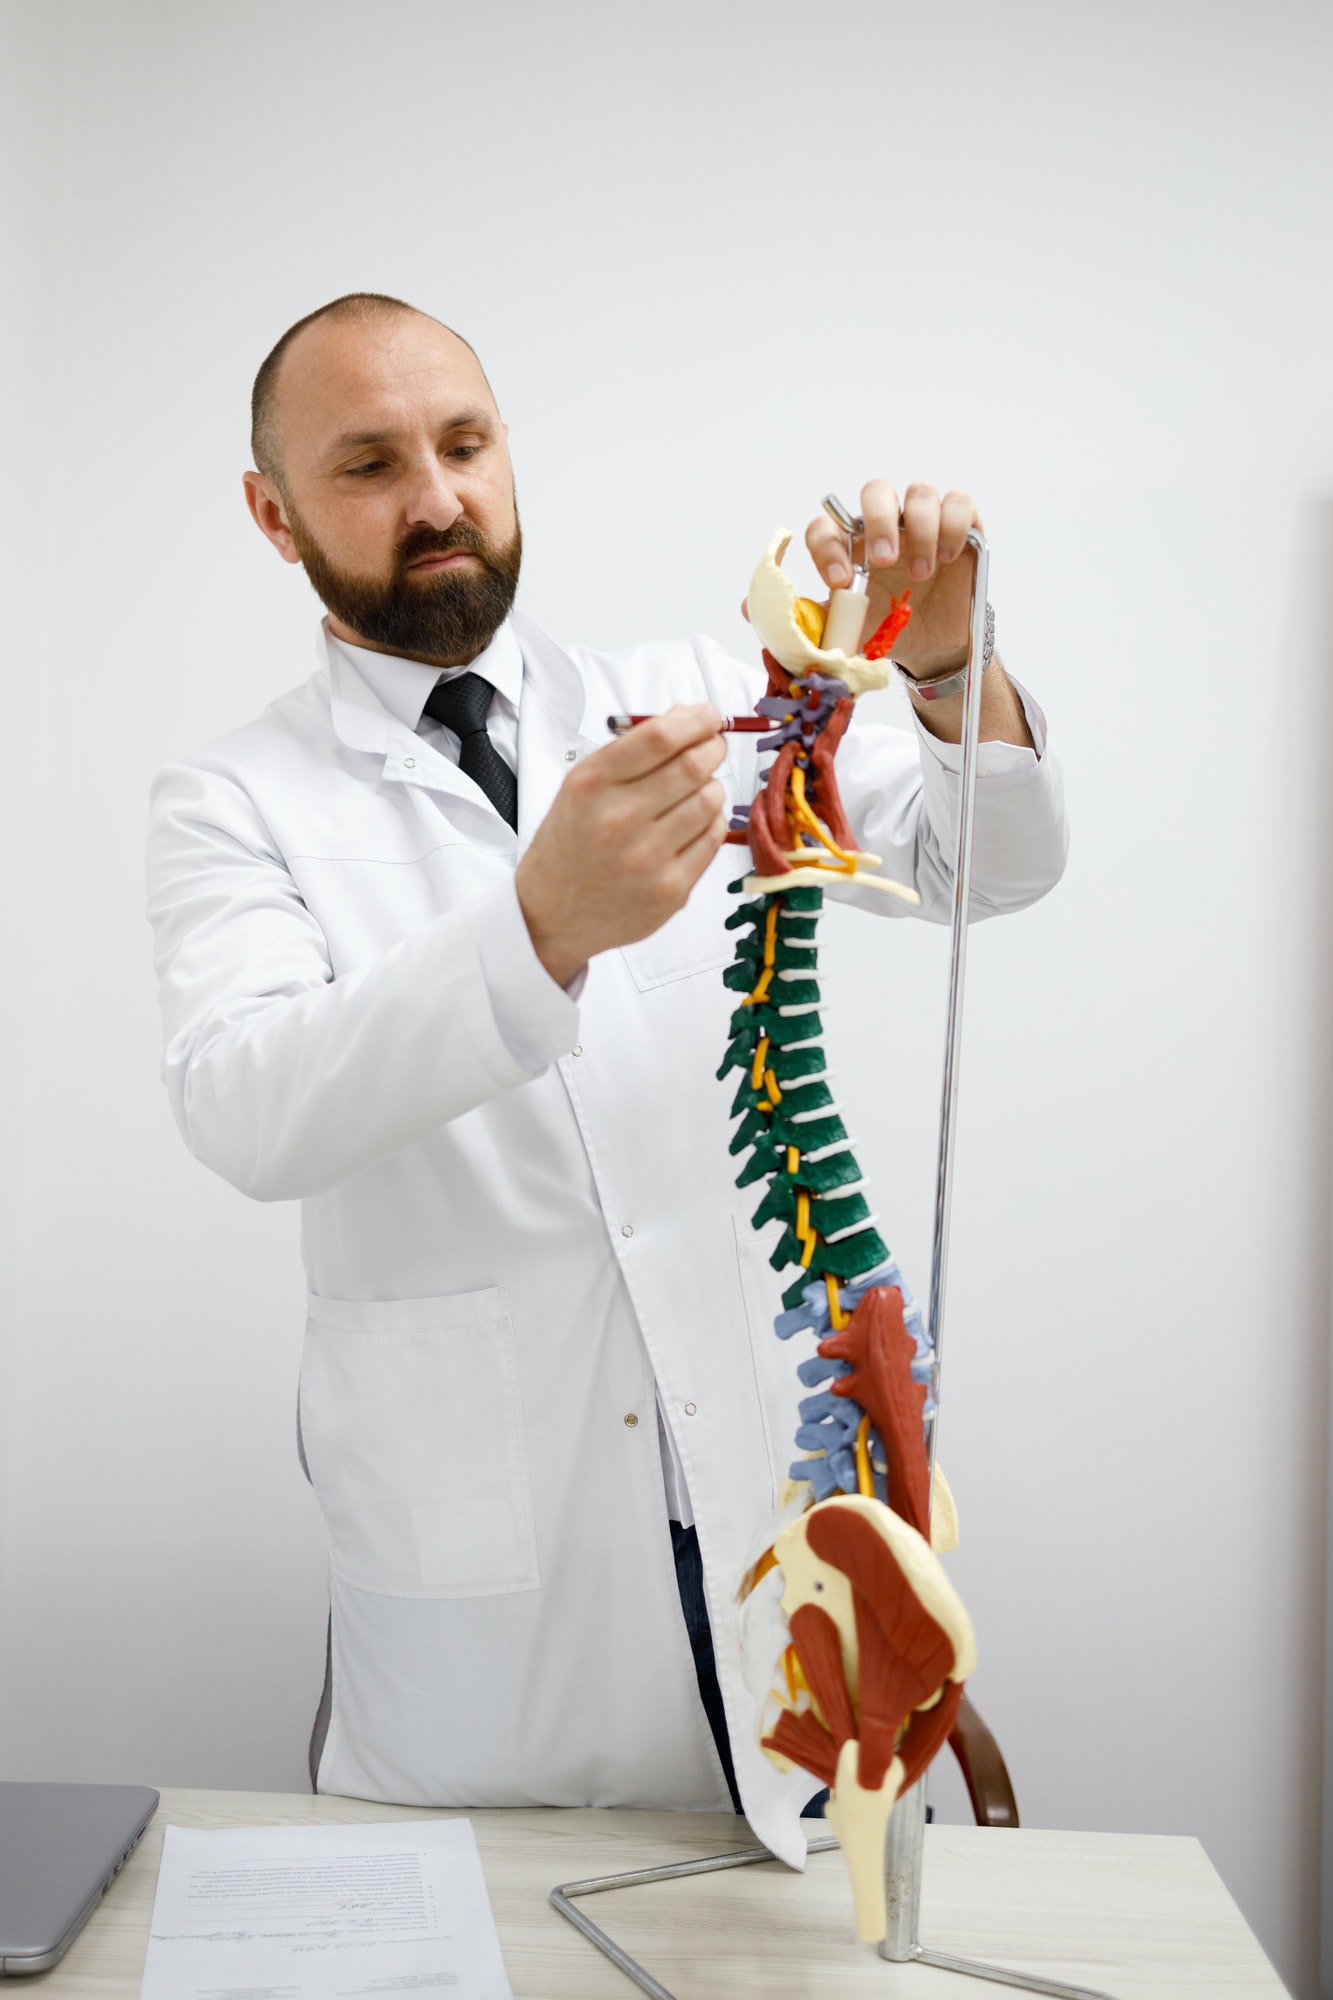 Male doctor shows the spine model